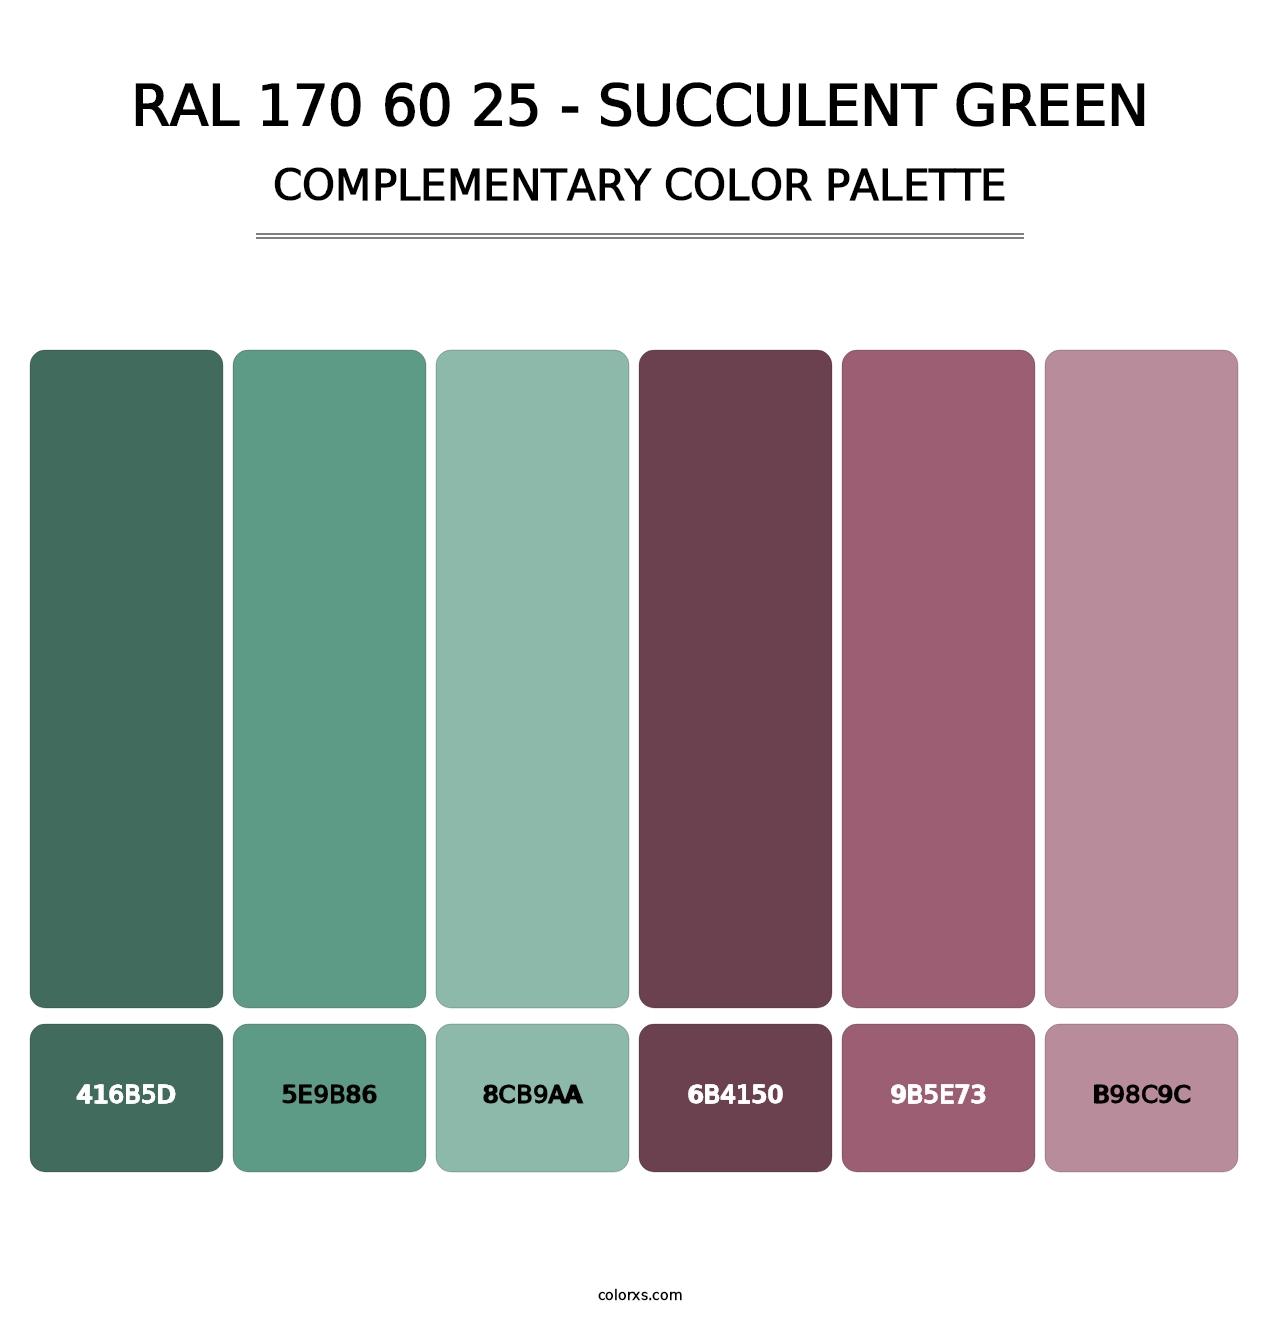 RAL 170 60 25 - Succulent Green - Complementary Color Palette